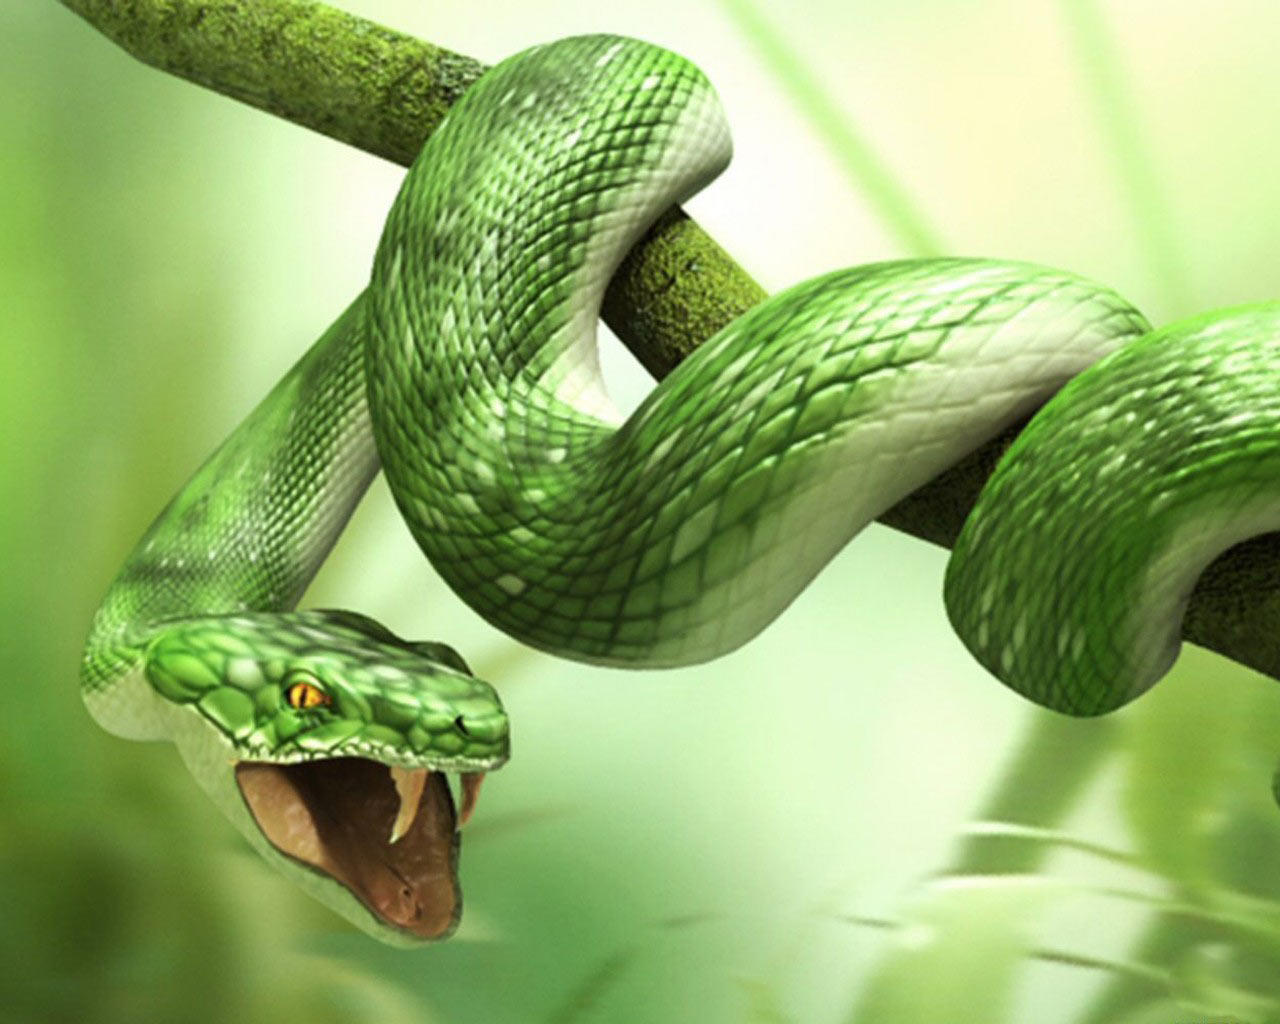 Wallpaper Zh: 3D Images Of Animals